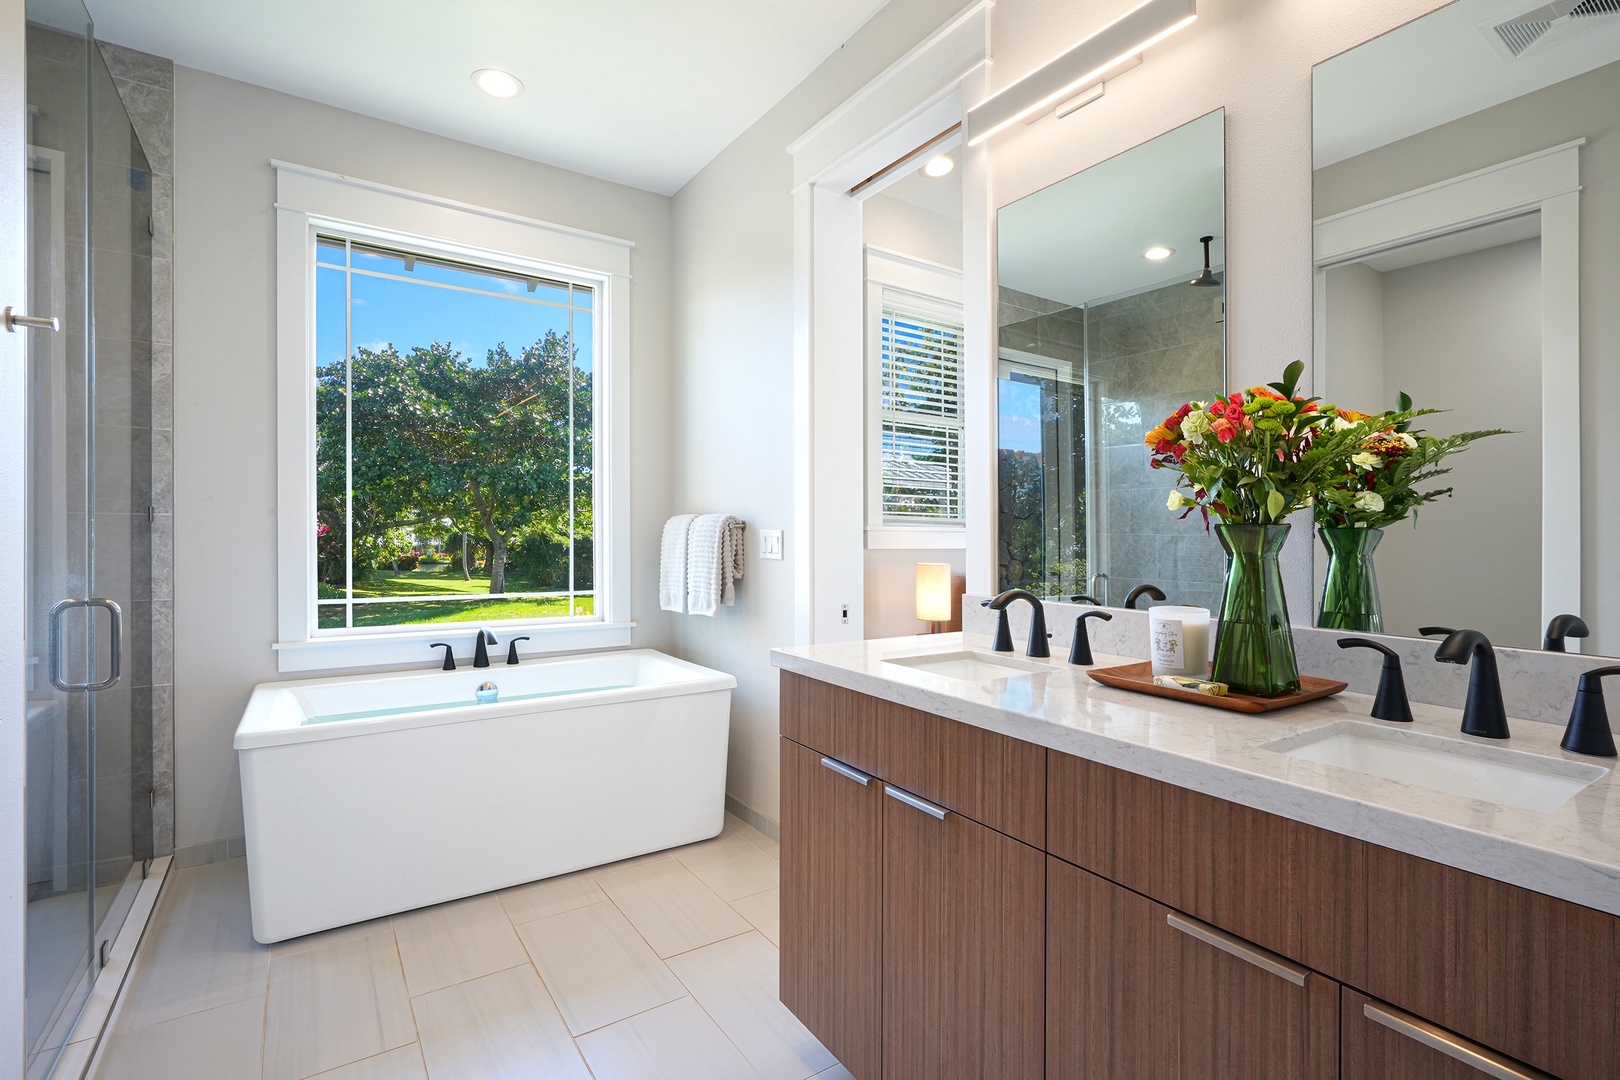 Koloa Vacation Rentals, JC Surf House - Primary bathroom with soaking tub and outdoor lava rock shower